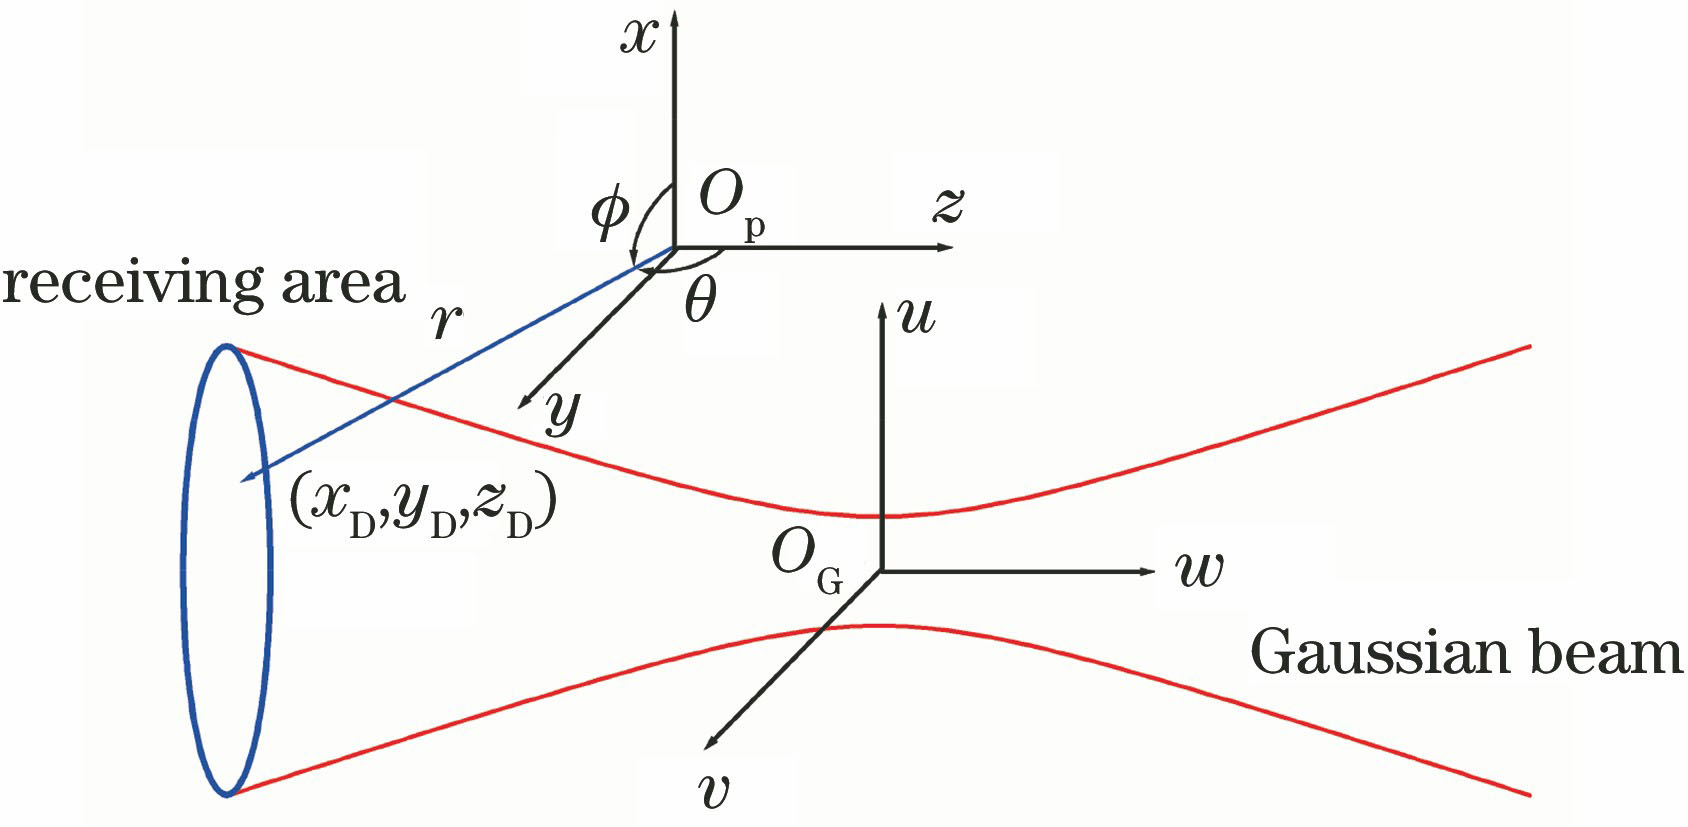 Coordinate systems of Gaussian beam and particle